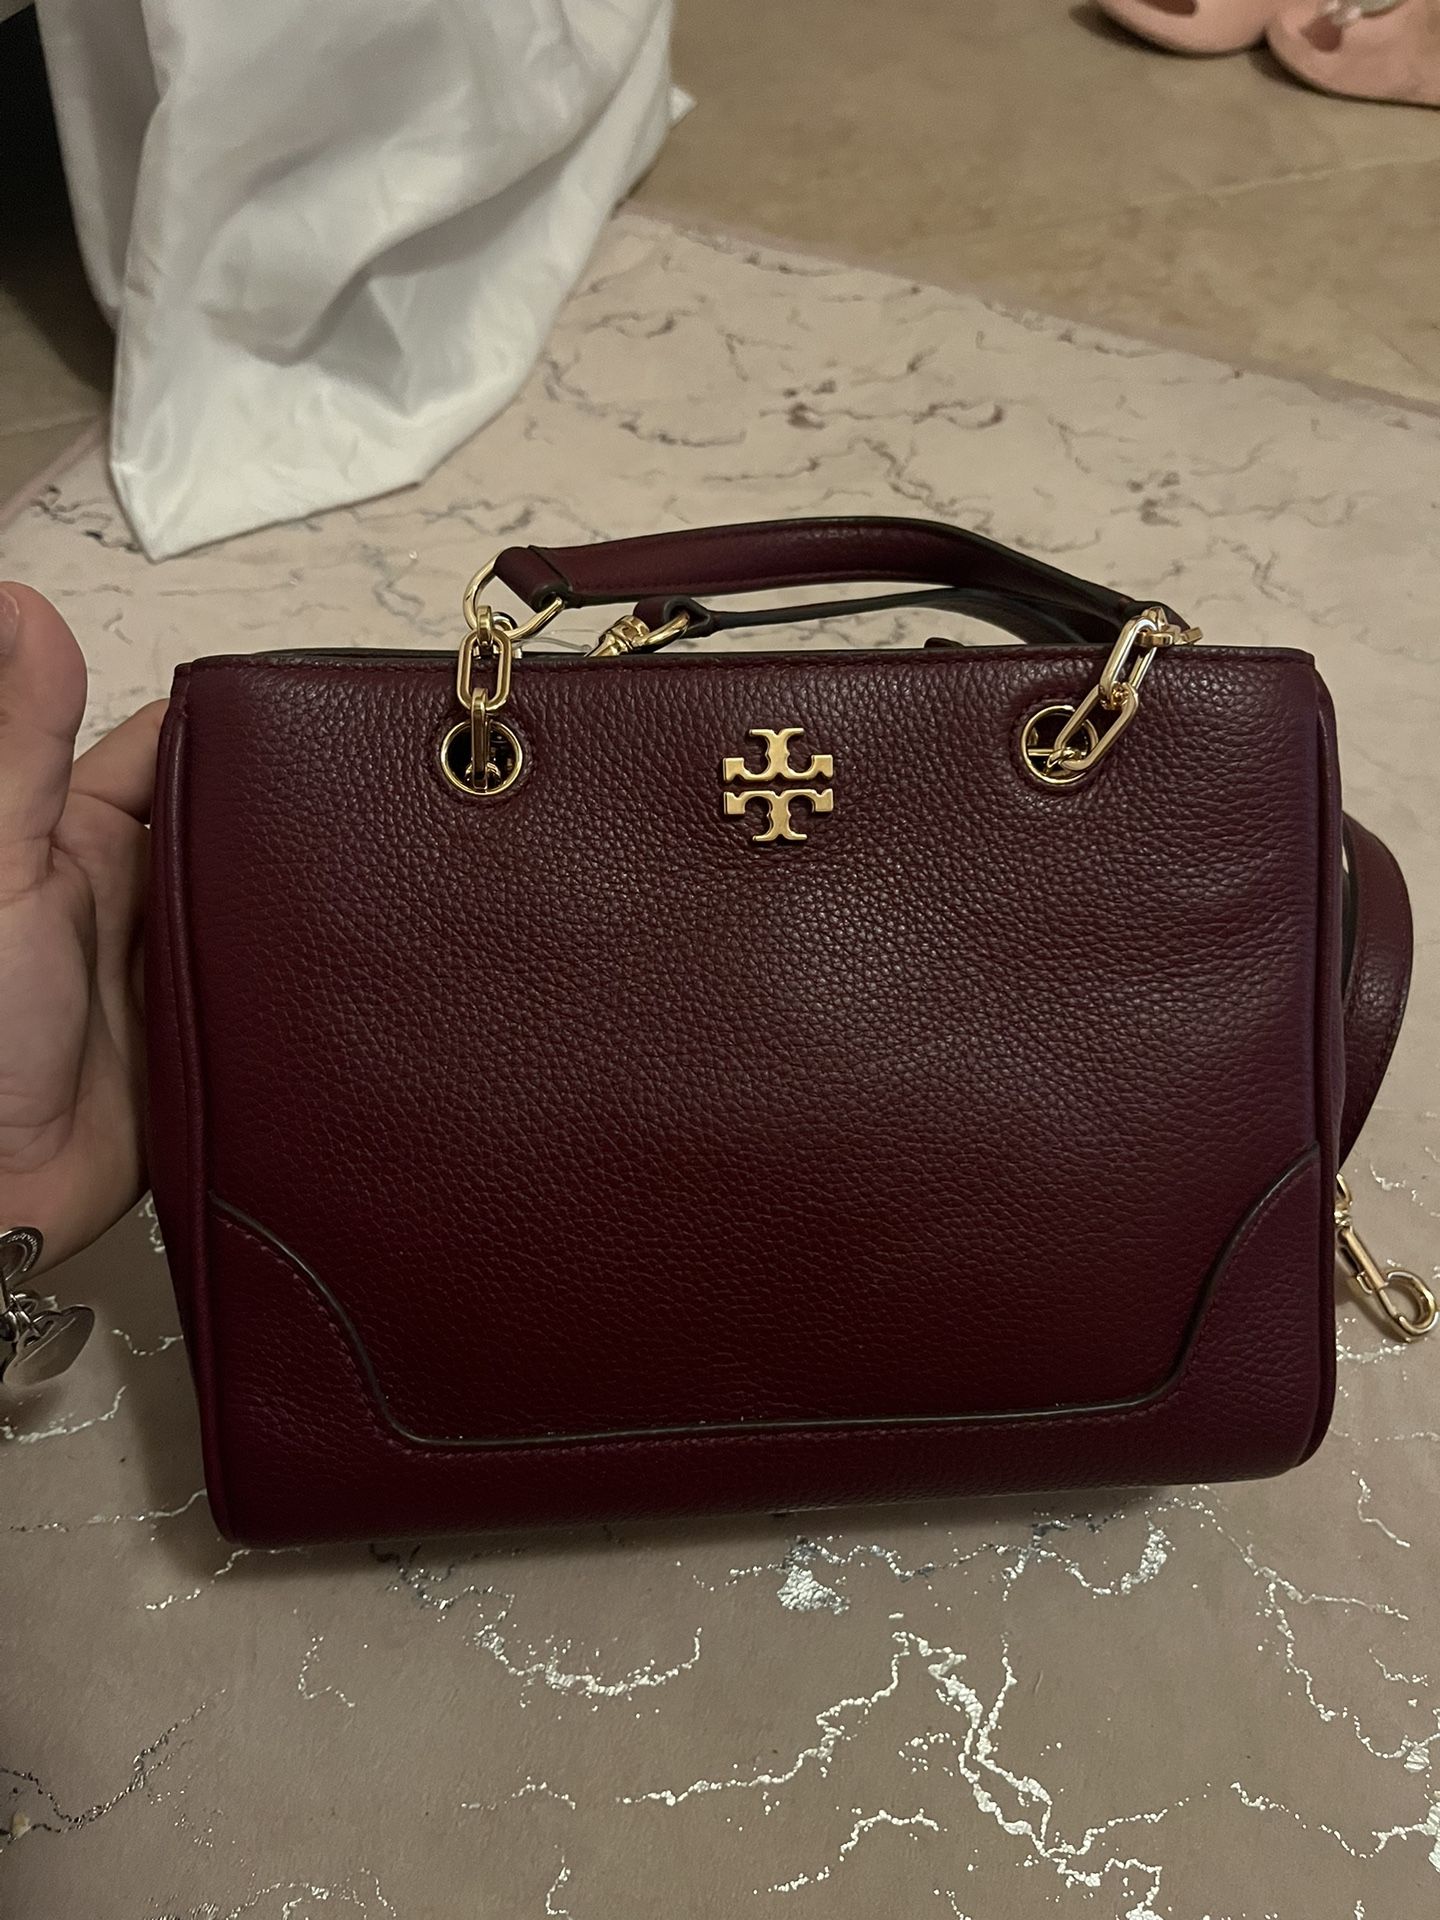 Tory Burch Purse And Wallet 